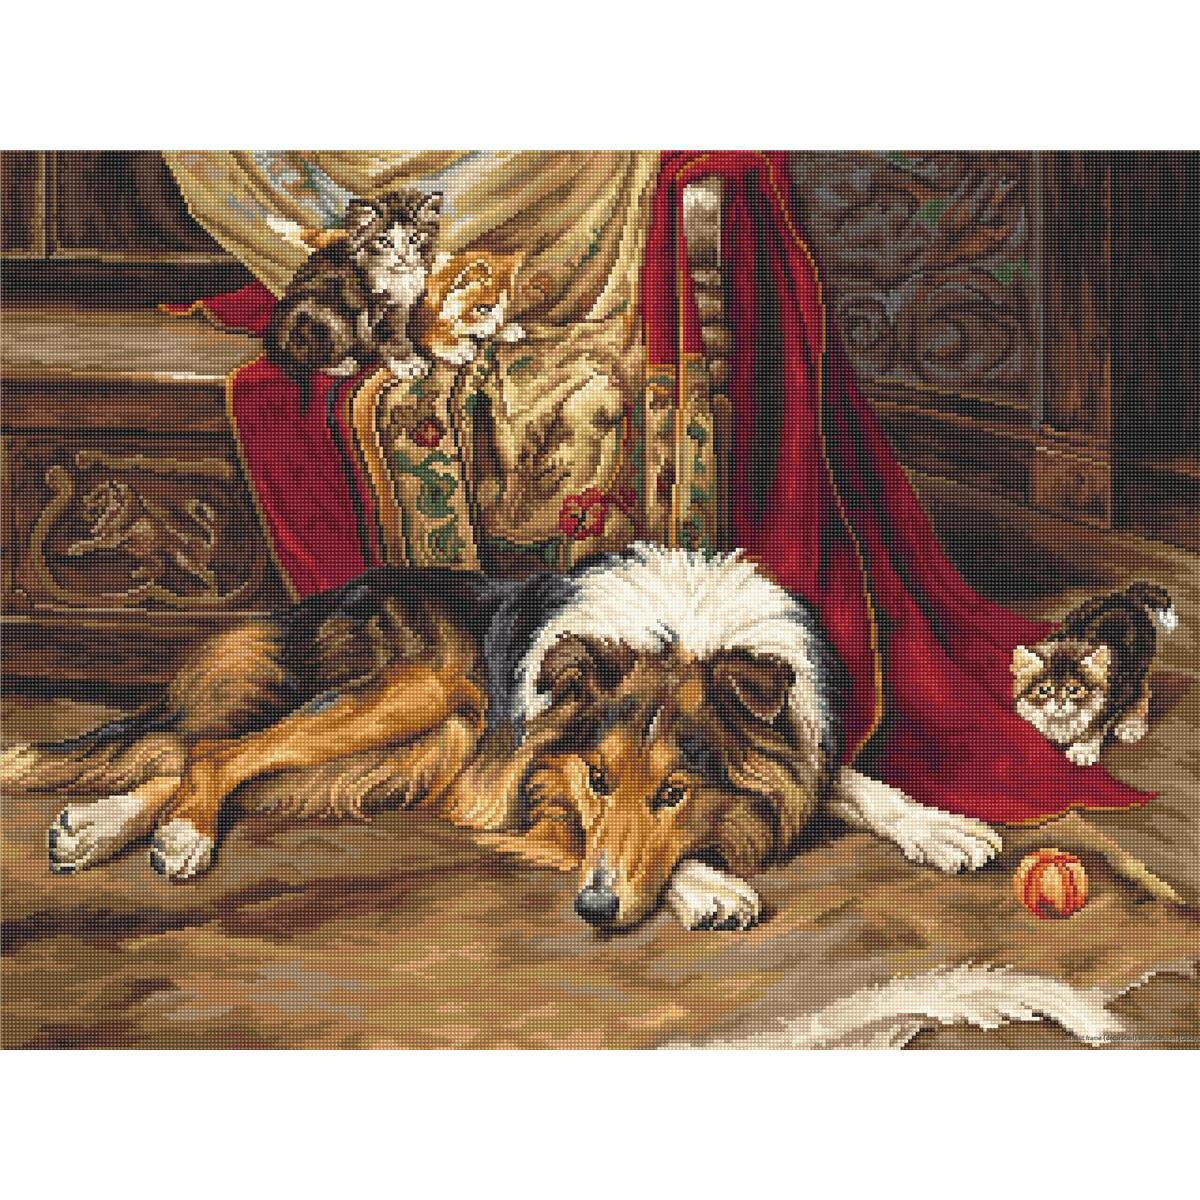 A collie lies on the floor in front of a decorated chair...